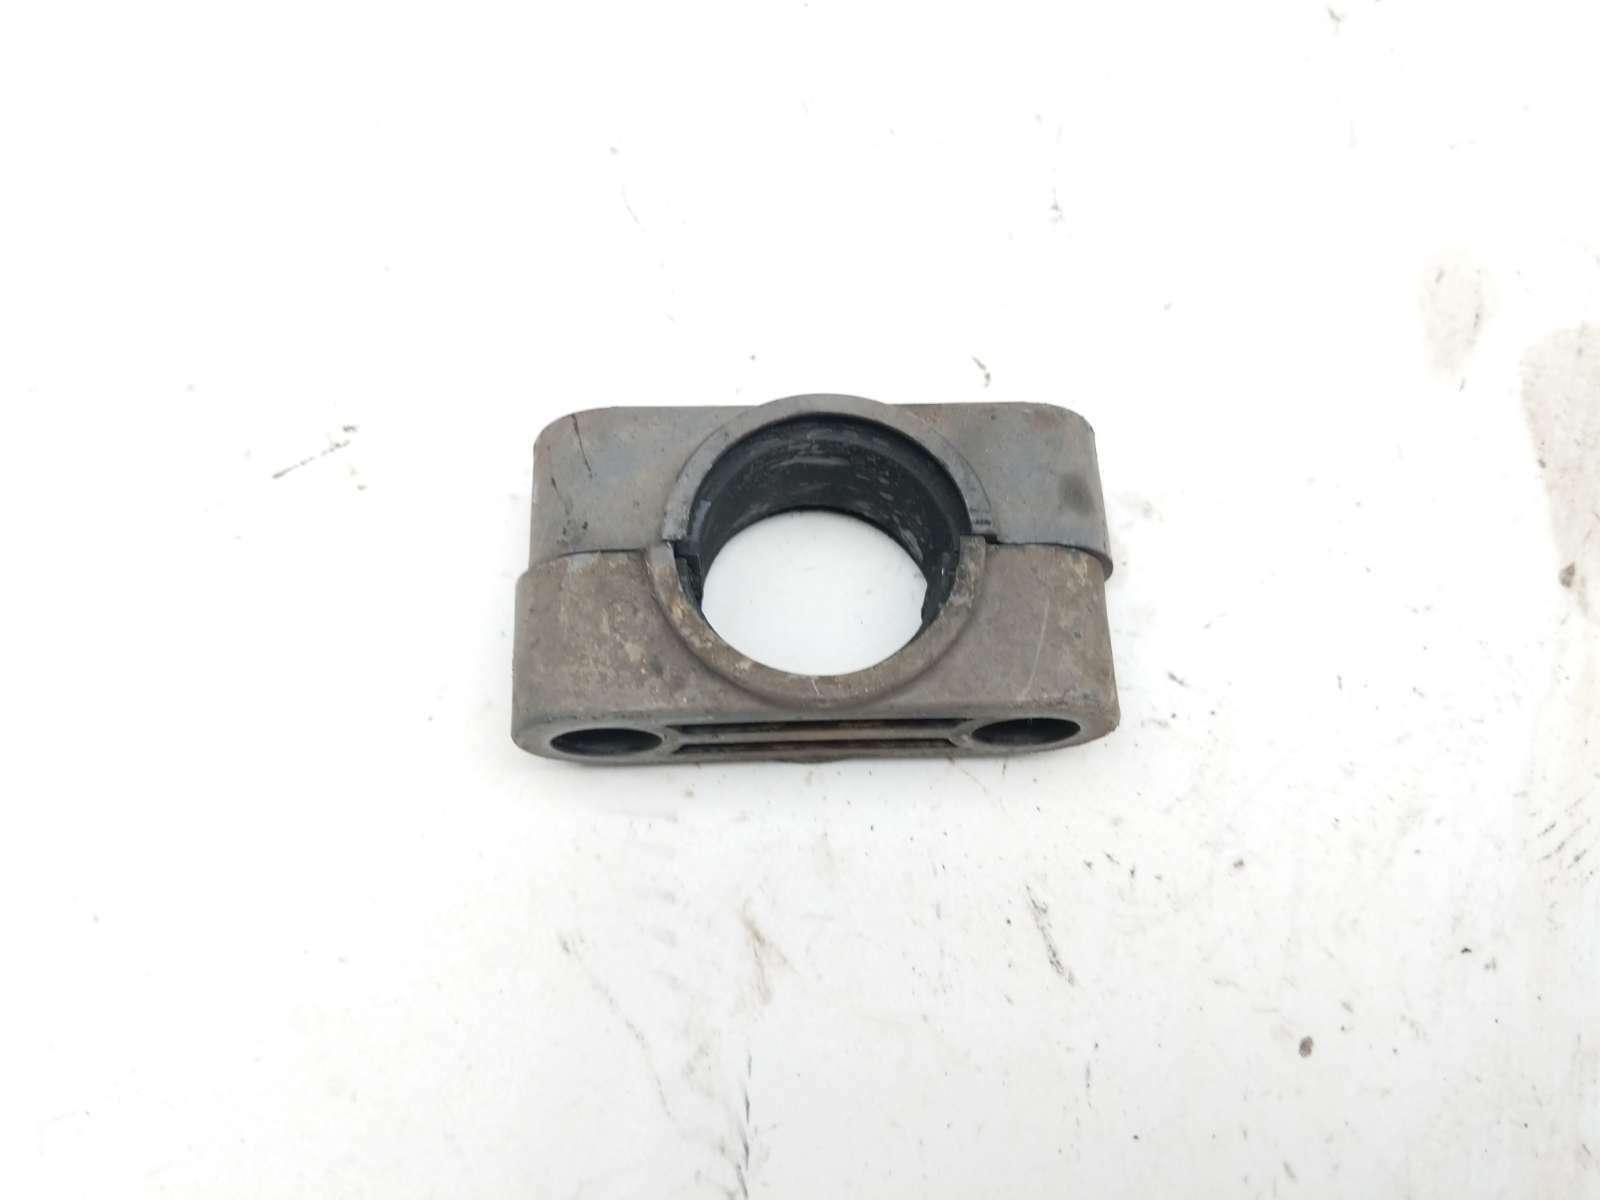 01 Yamaha Grizzly 600 Steering Shaft Mount Bracket Clamp